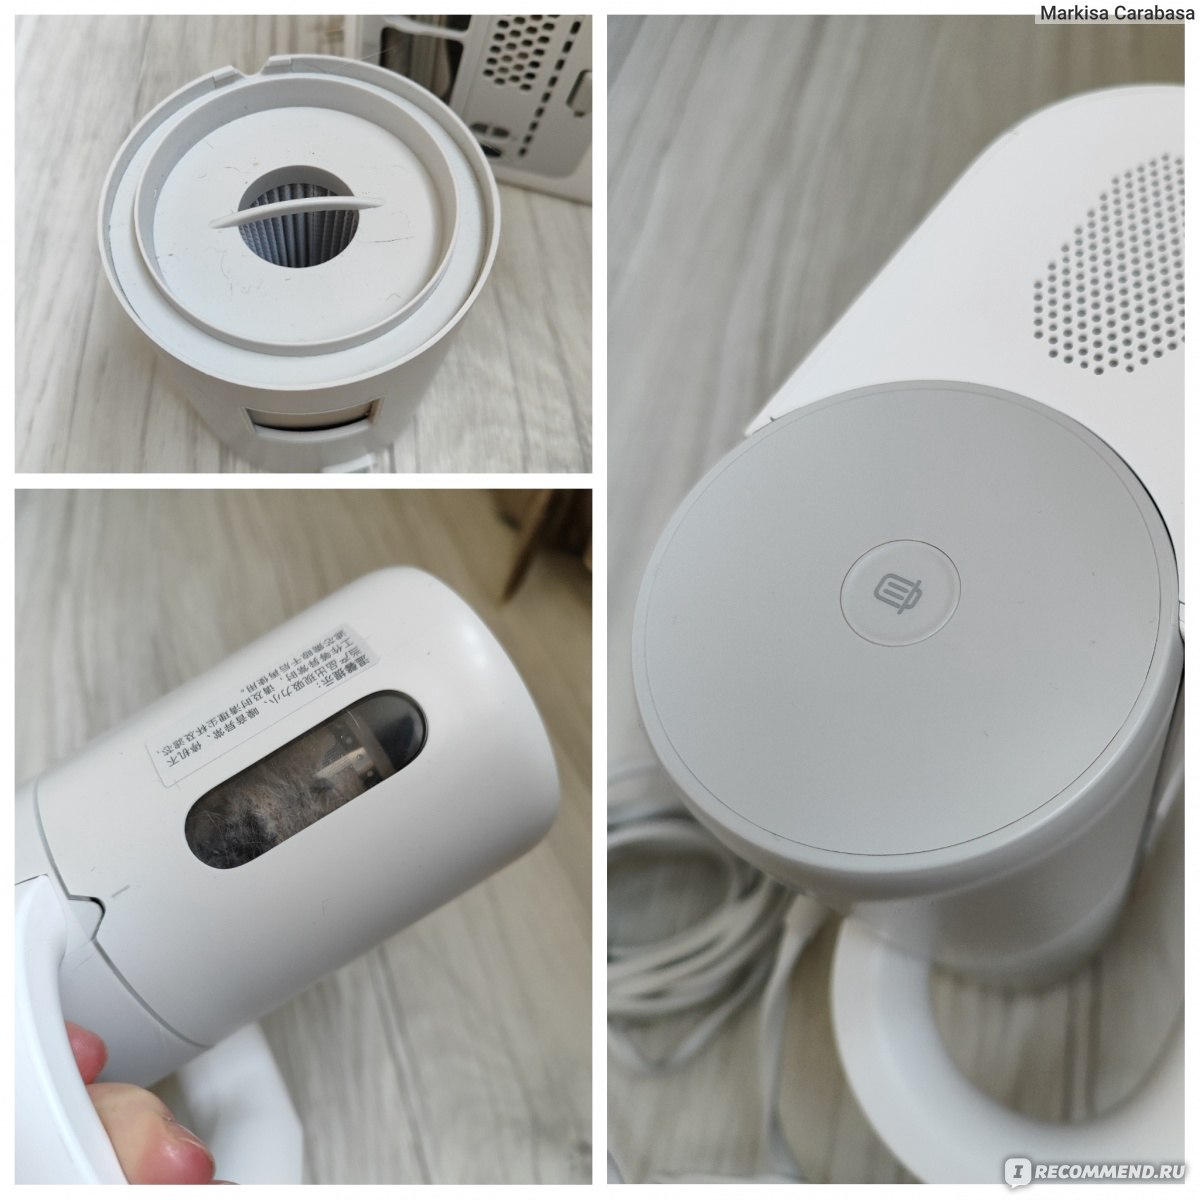 Mijia dust mite vacuum cleaner mjcmy01dy. Пылесос Xiaomi (mjcmy01dy). Xiaomi Dust Mite Vacuum. Xiaomi Dust Mite Vacuum Cleaner mjcmy01dy лампочка. Xiaomi Mijia Dust Mite Vacuum Cleaner.